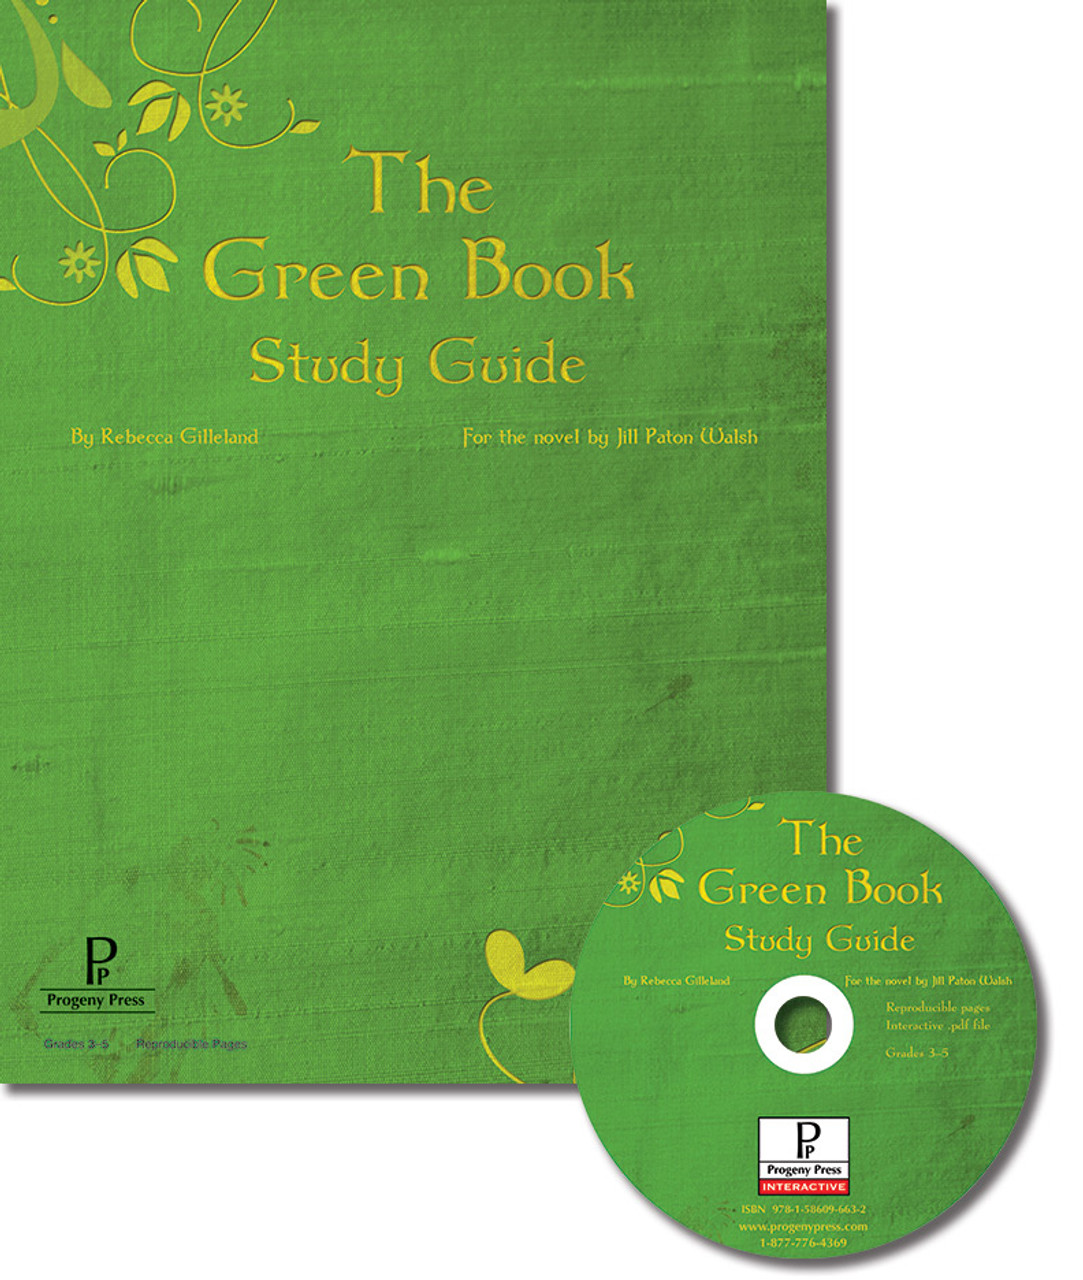 Progeny　Guide　Curriculum　Book　Literature　The　Press　Green　Study